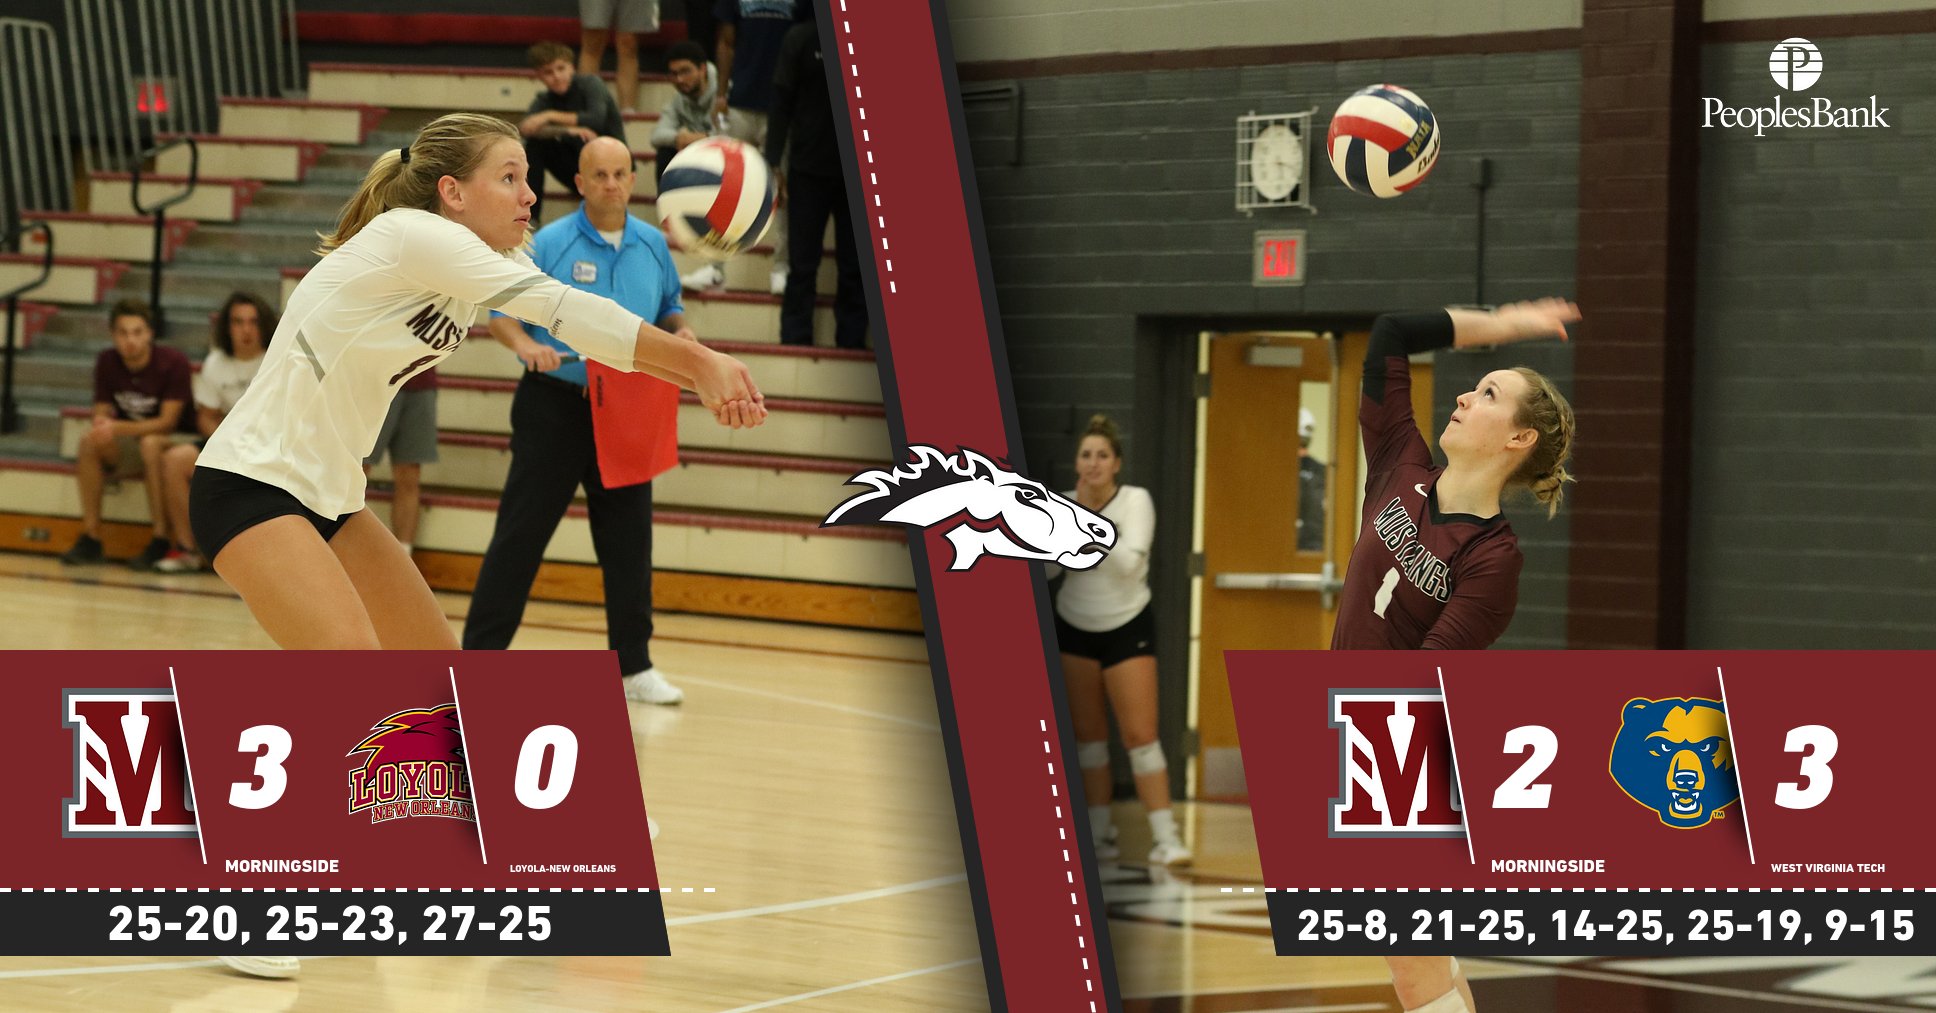 Mustangs split Saturday matches, defeating Loyola 3-0, and losing to West Virginia Tech 3-2.